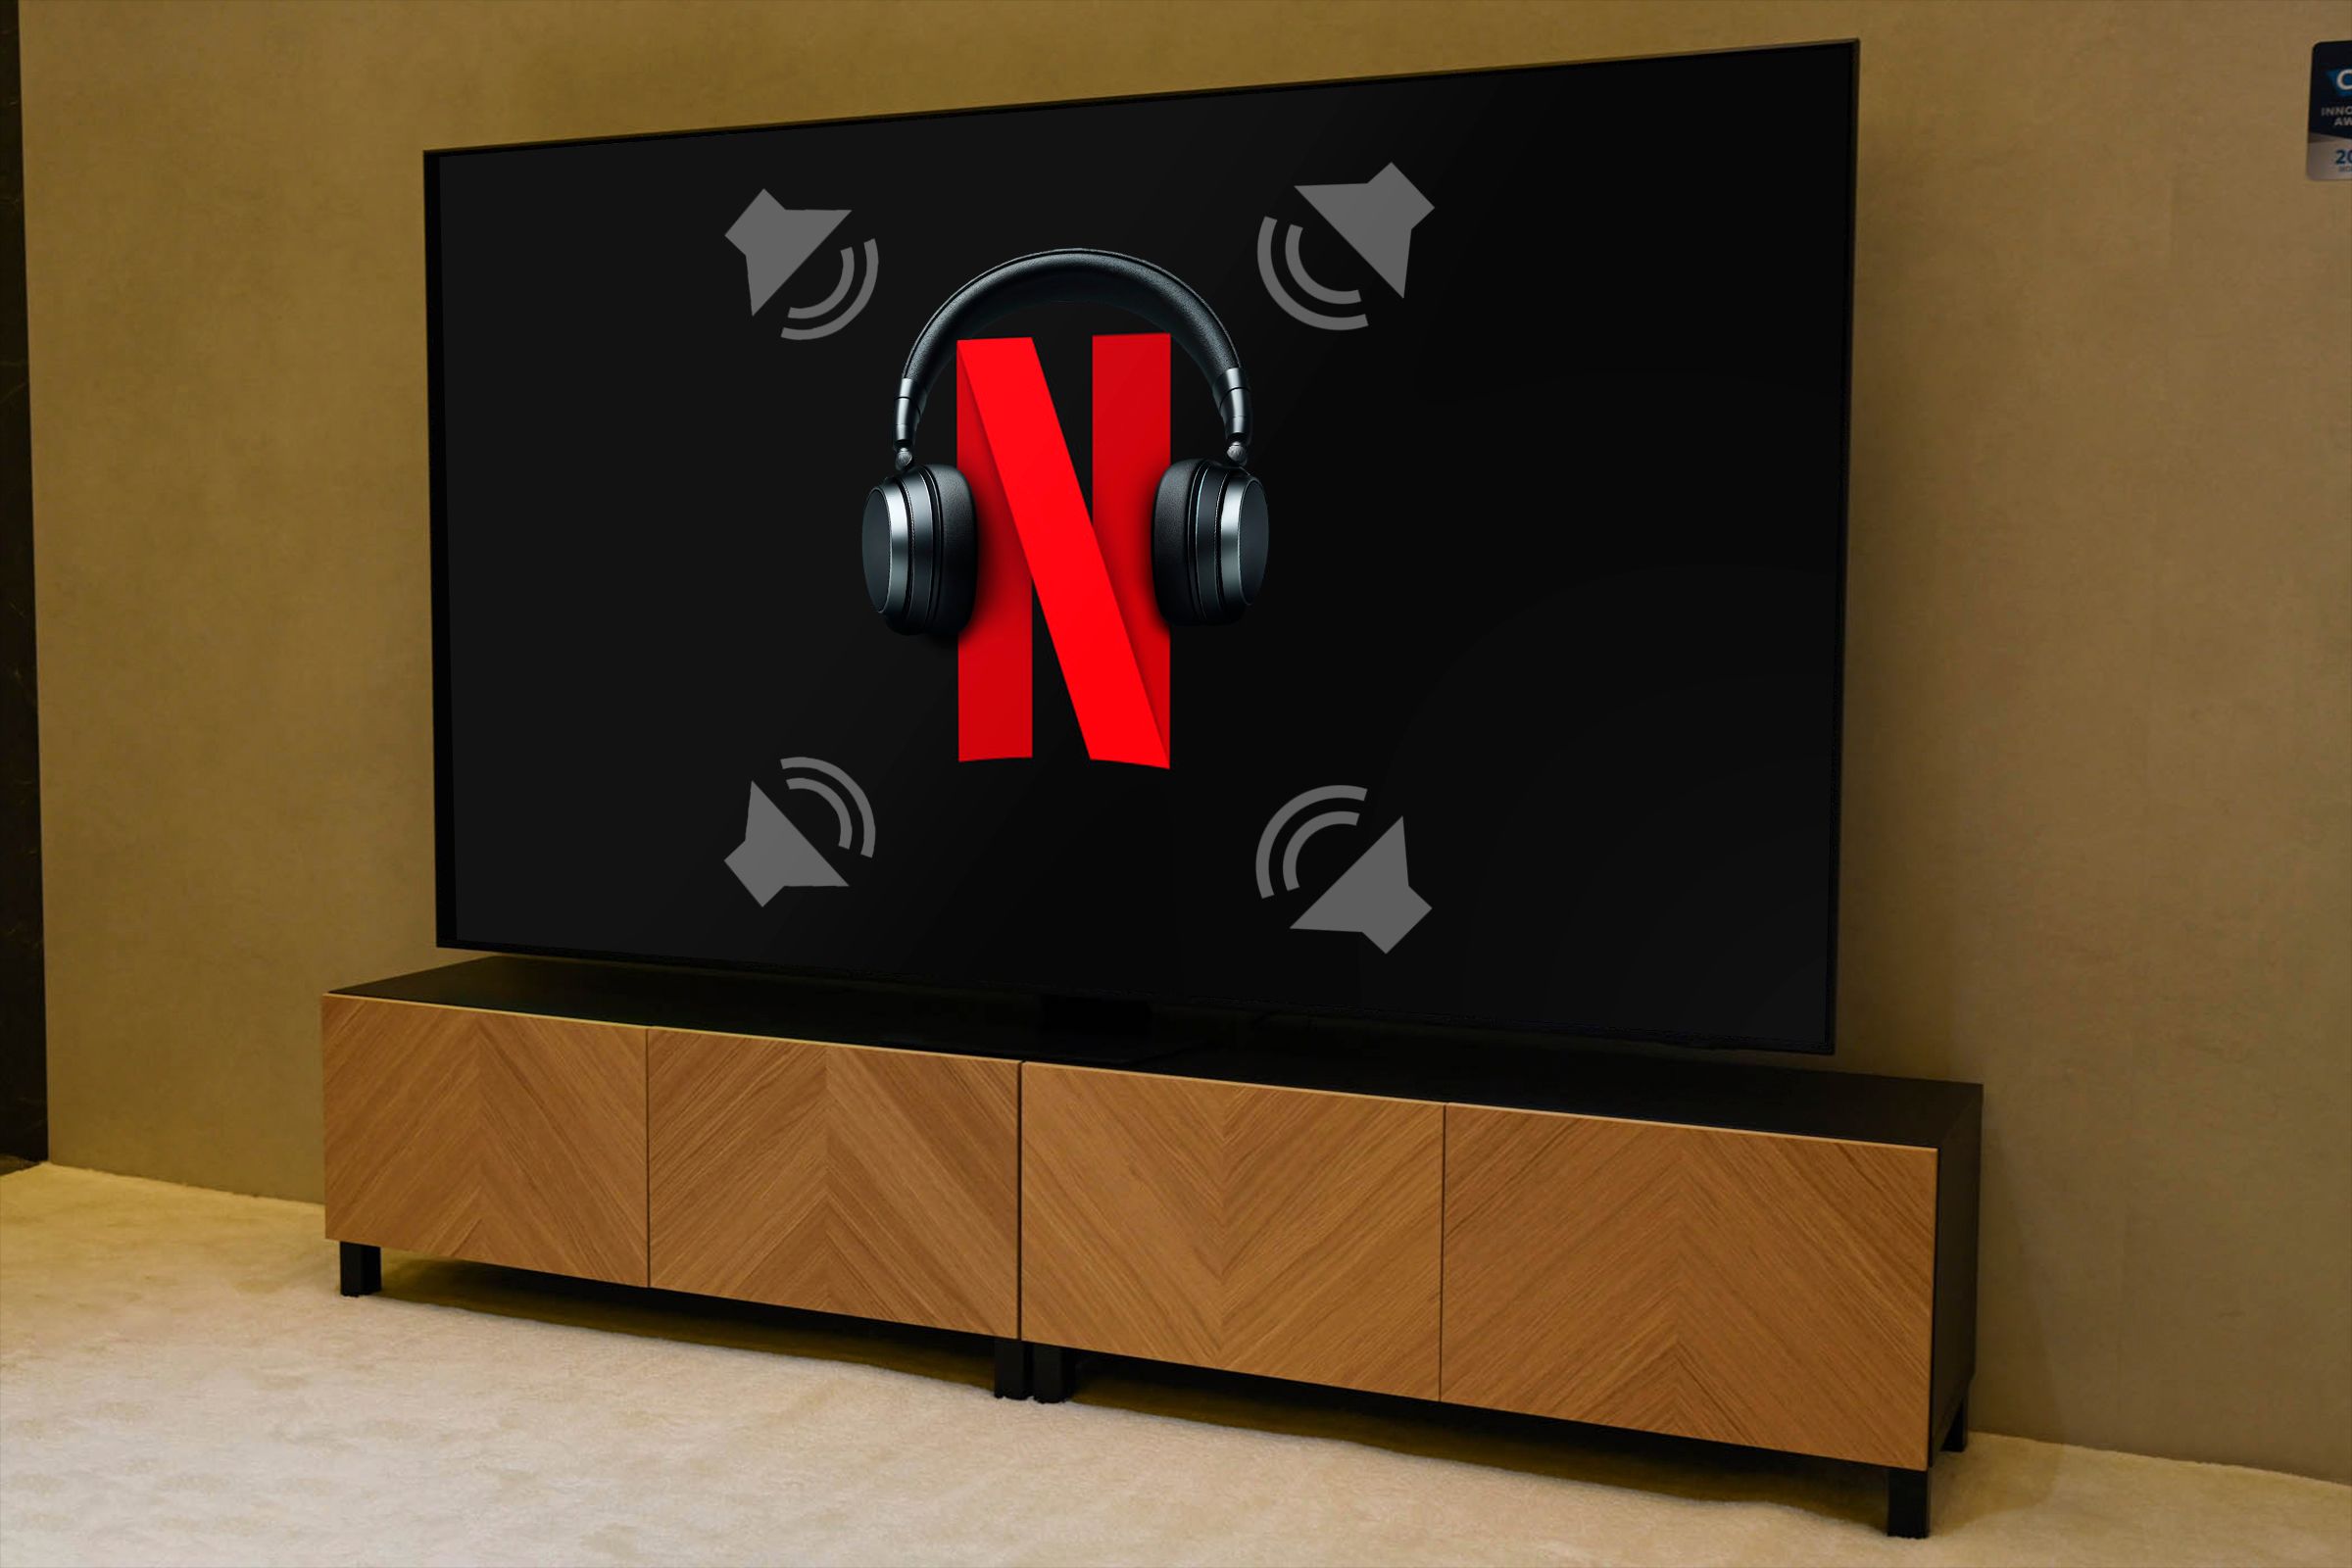 Netflix logo on a TV with a headset and some speaker icons around it.